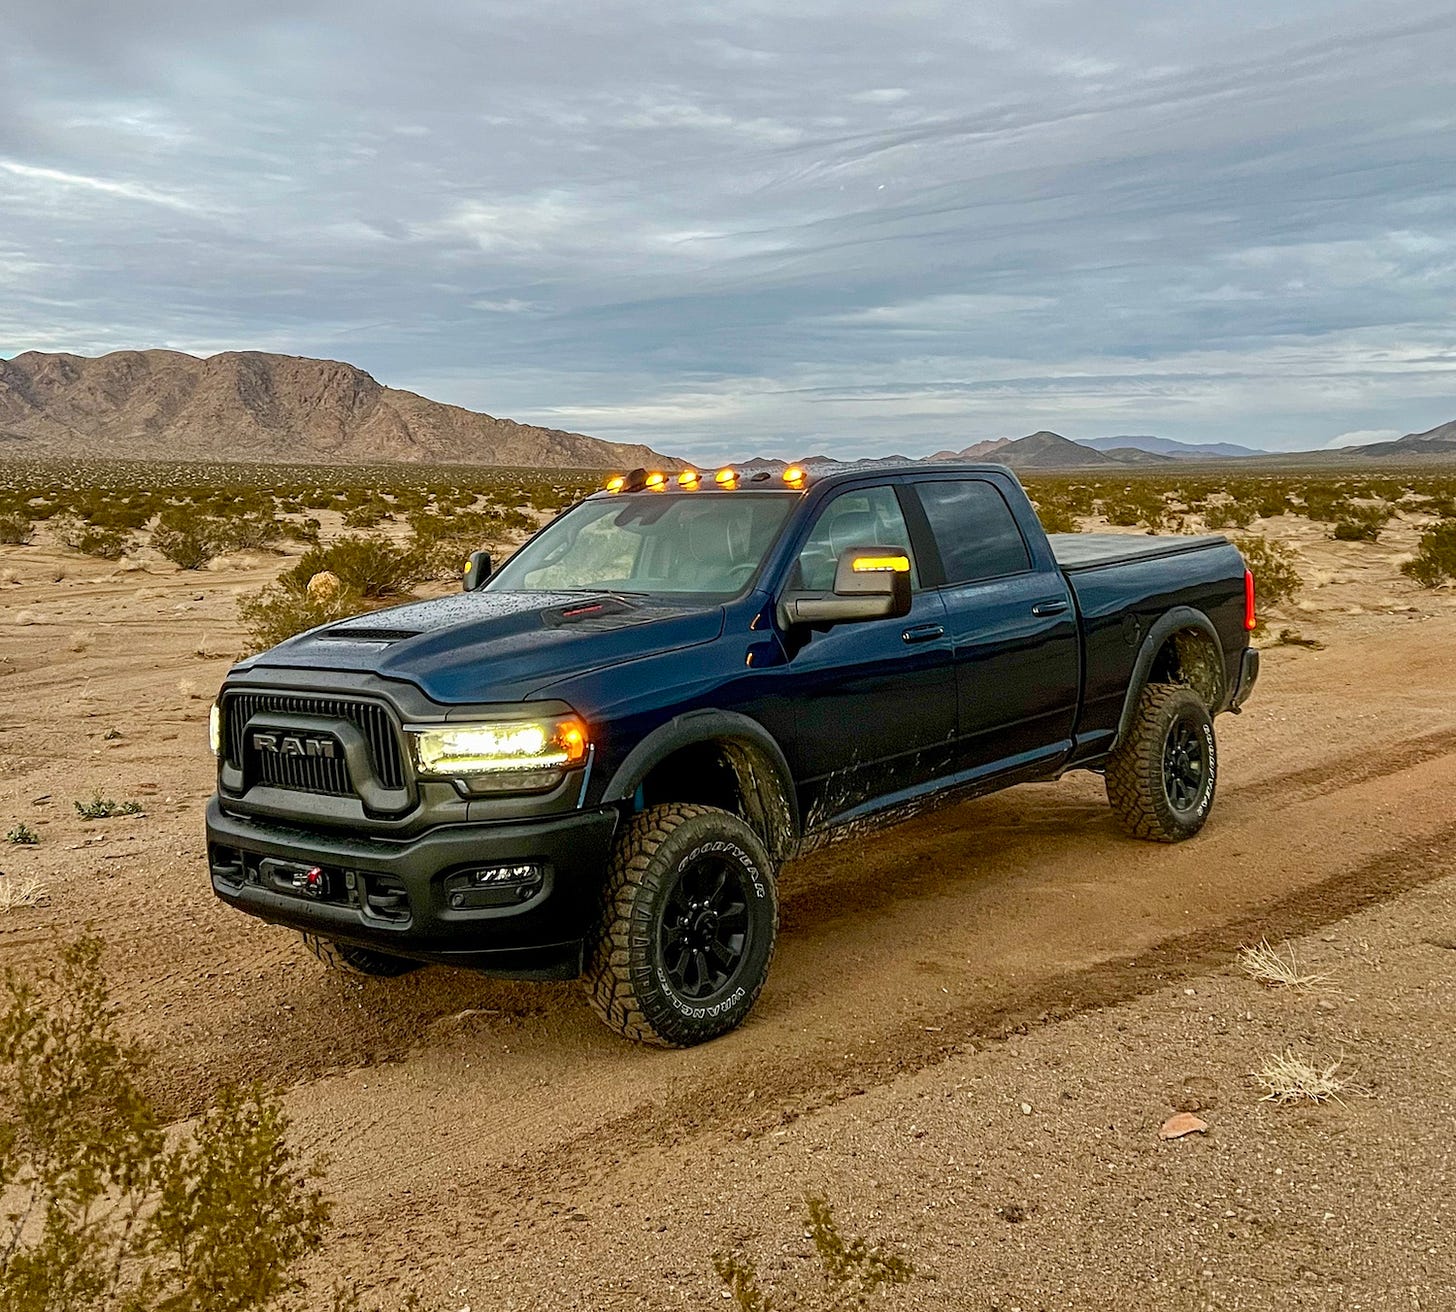 Front three-quarter view of a dark blue Ram 2500 Power Wagon parked in the desert, with dirt covering its all-terrain tires and splashed onto the doors.